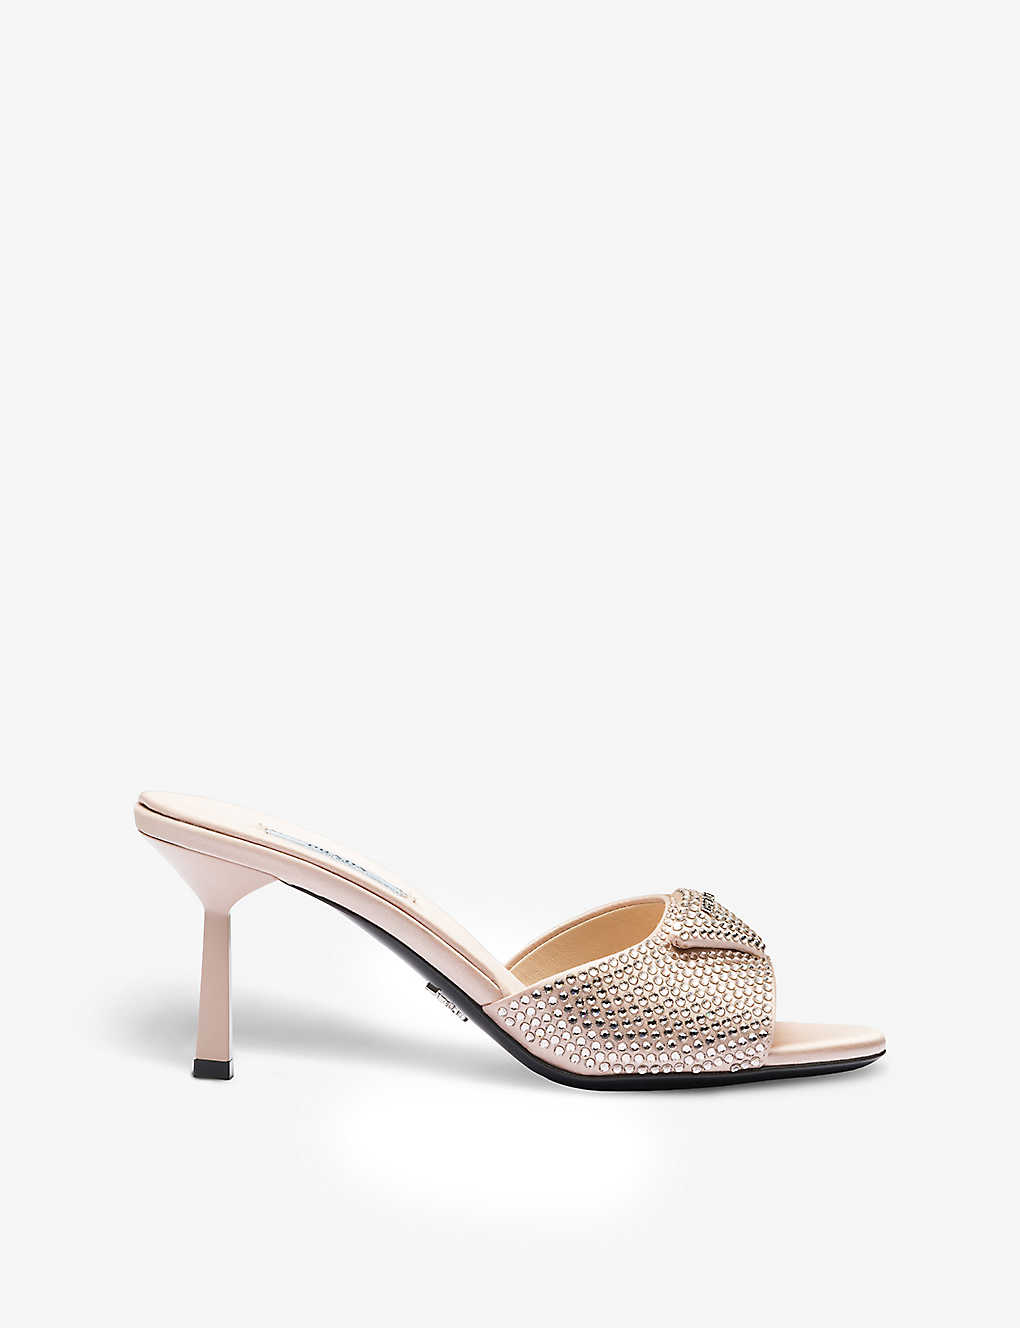 Prada Womens Powder Crystal-embellished Satin And Leather Heeled Sandals In Pale Pink